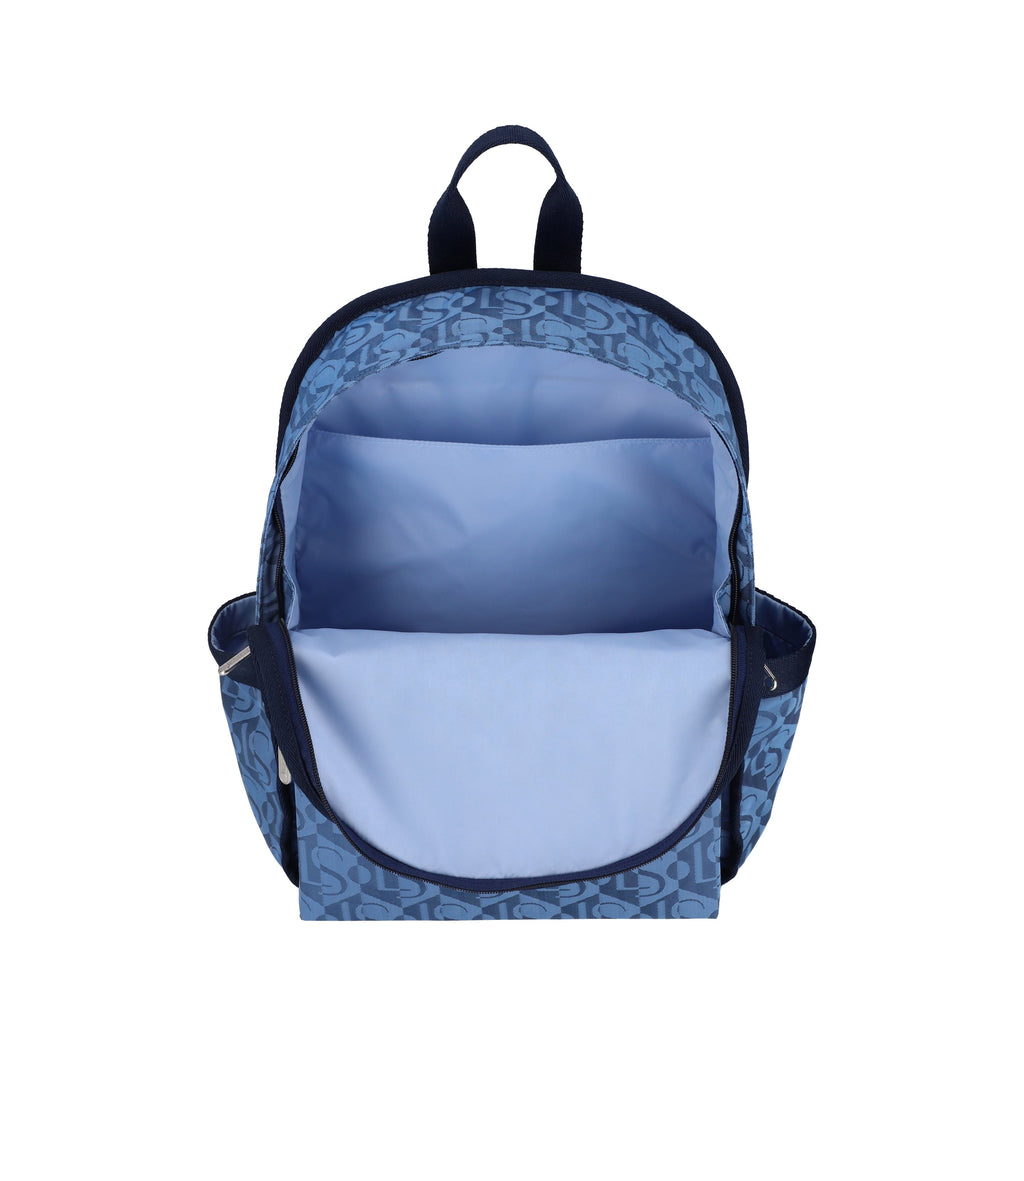 Route Small Backpack - 23818842800176